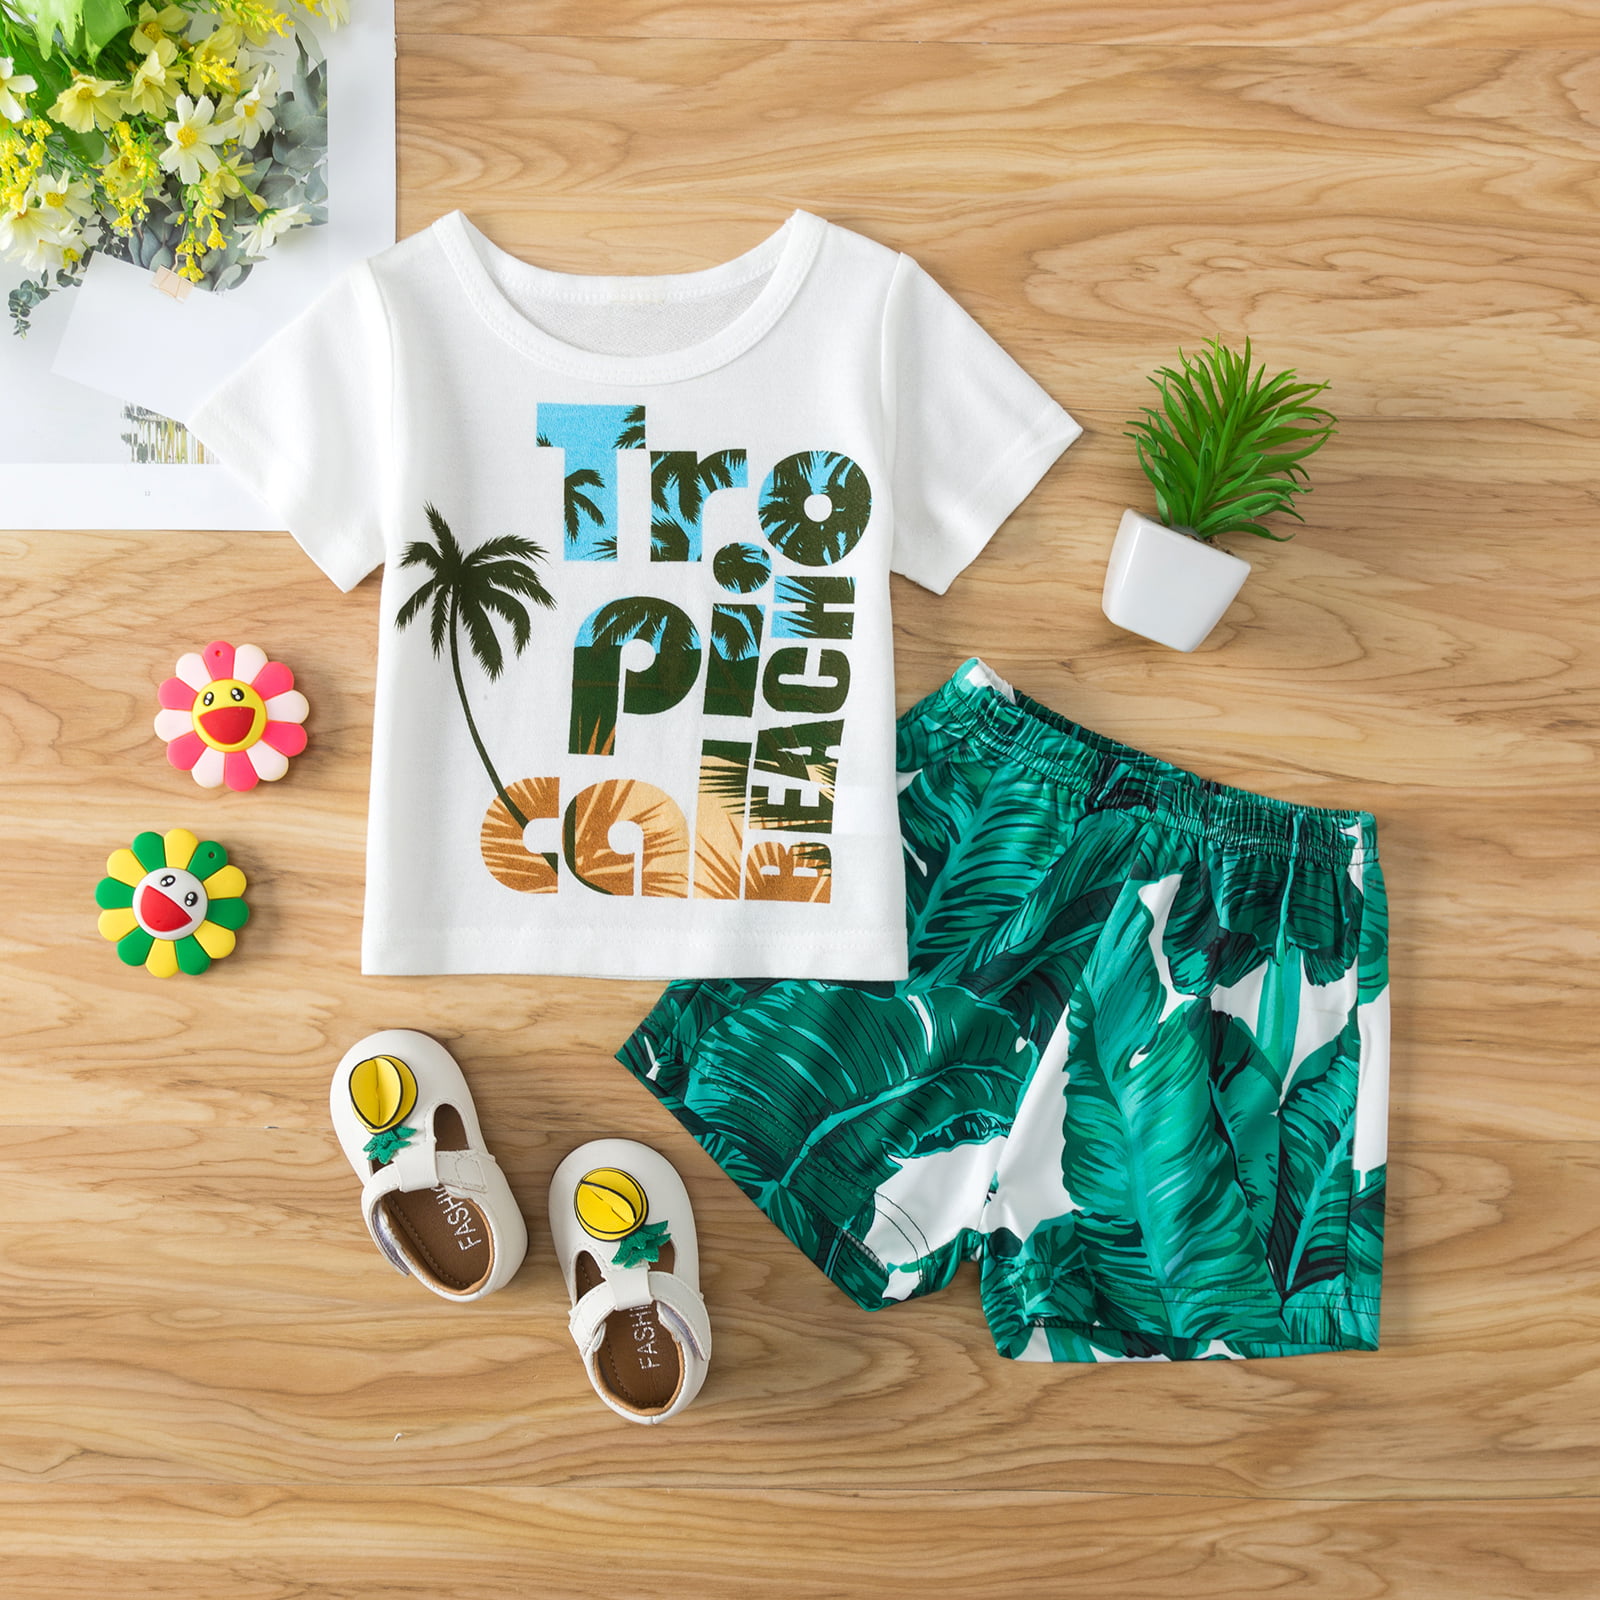 Details about   Coconut Tree Print Pull-on Youth Boys Shorts 